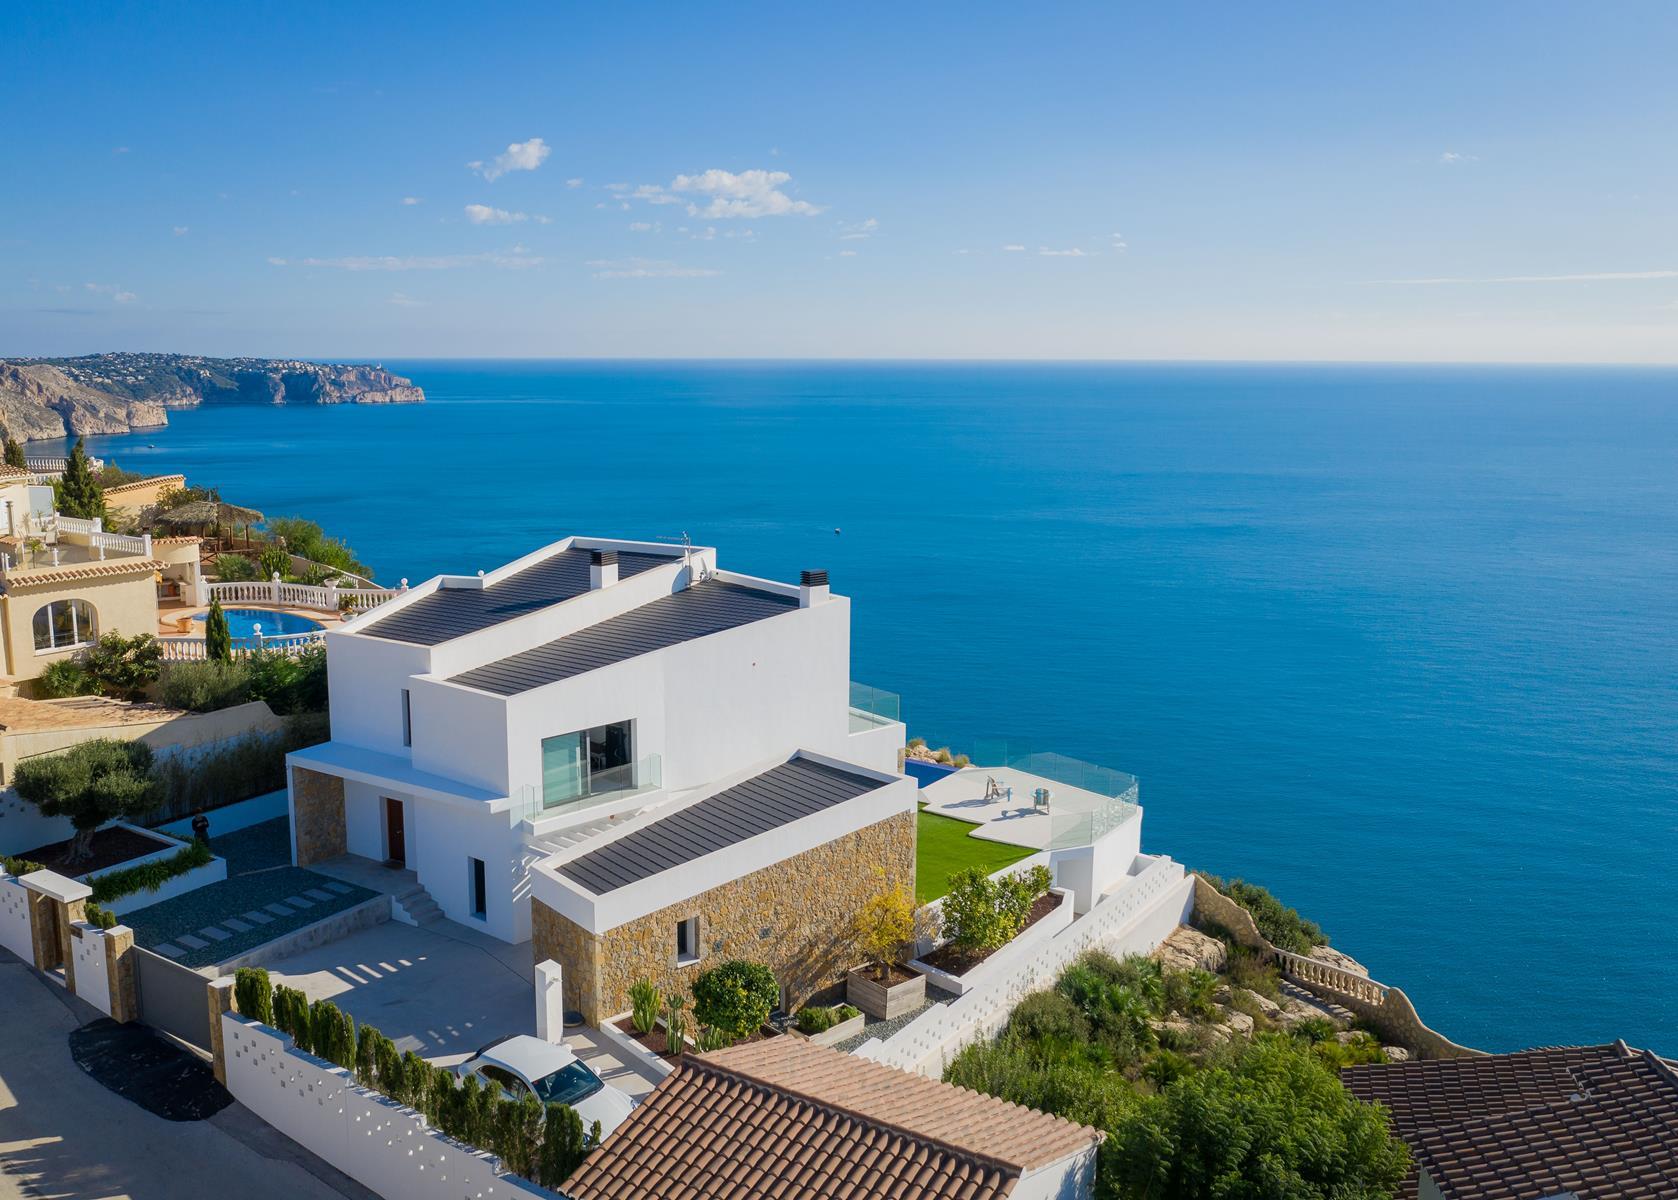 Luxury villa on the front line of the cliffs